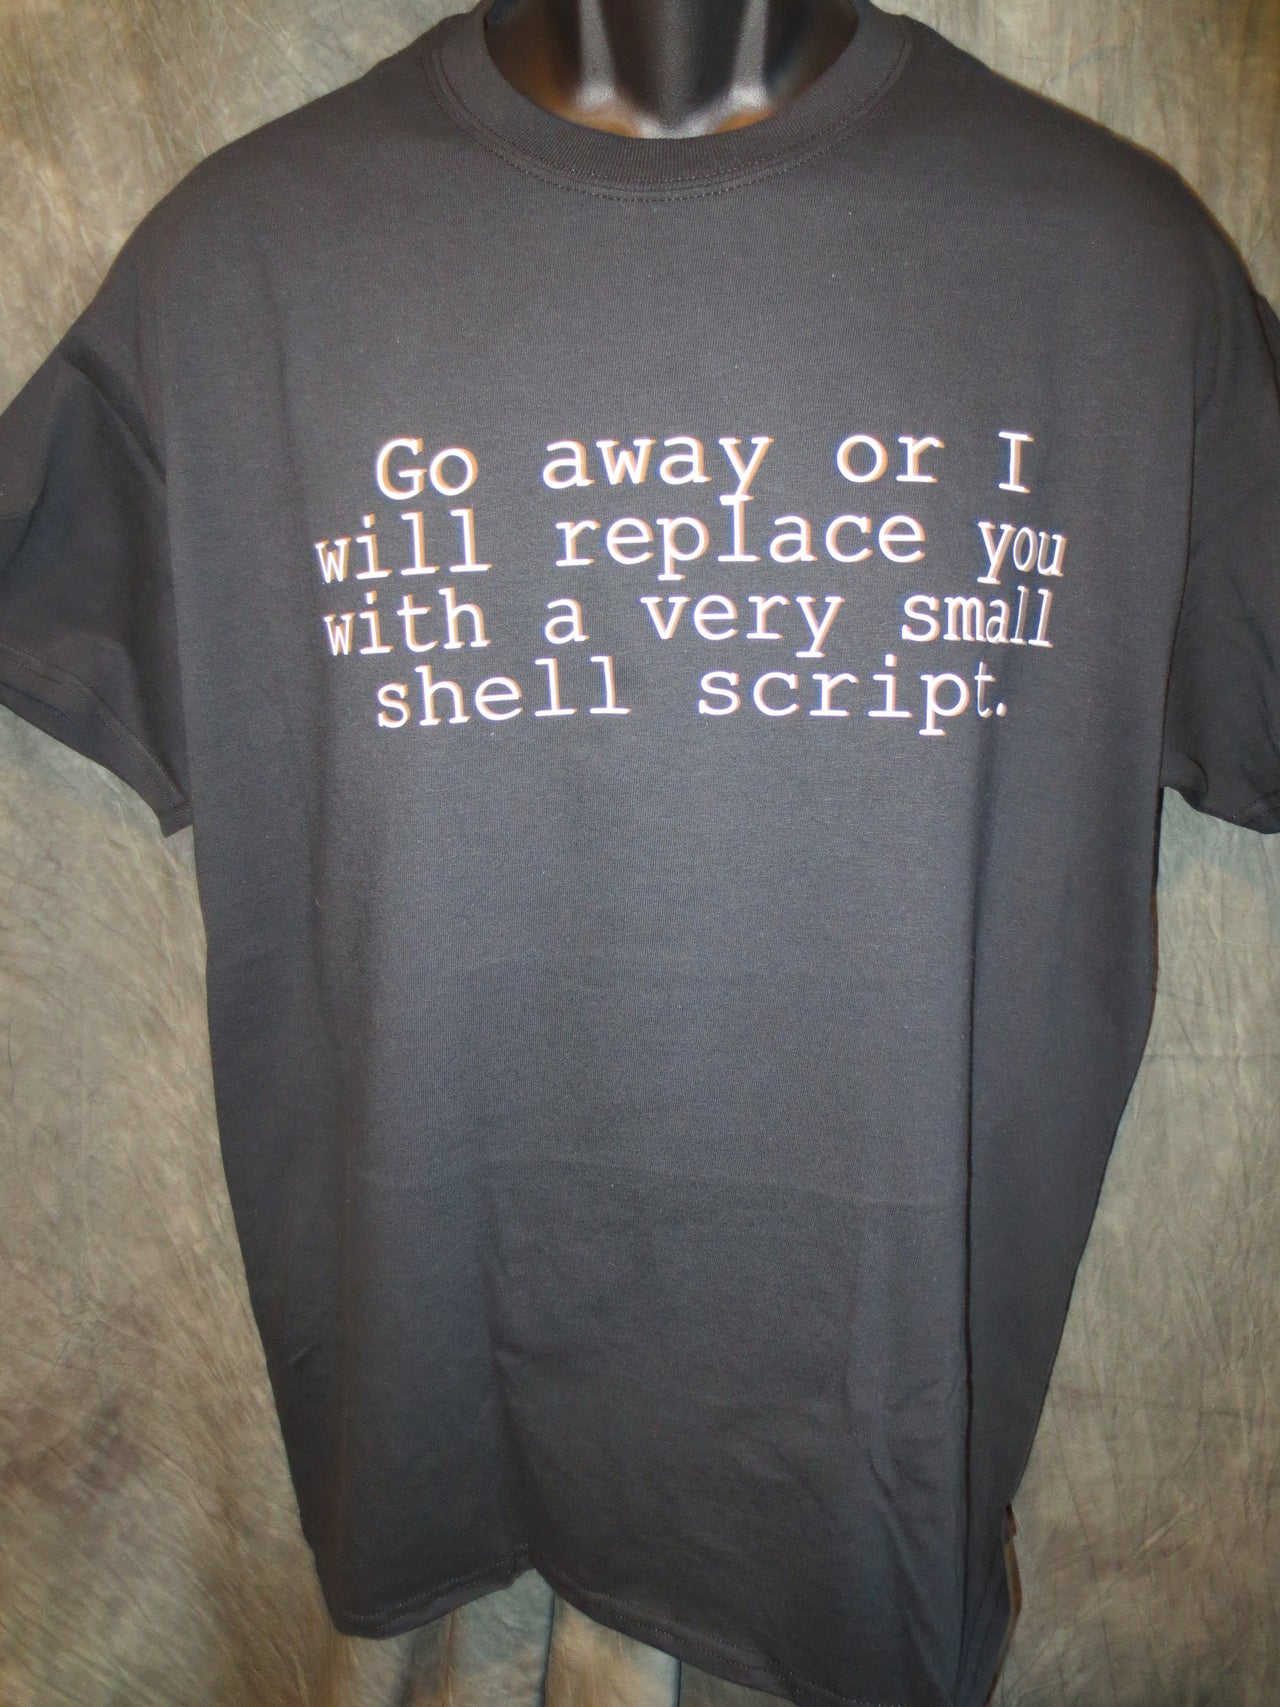 Go Away or I will Replace you With a Very Small Shell Script Tshirt: Black With White Print - TshirtNow.net - 2